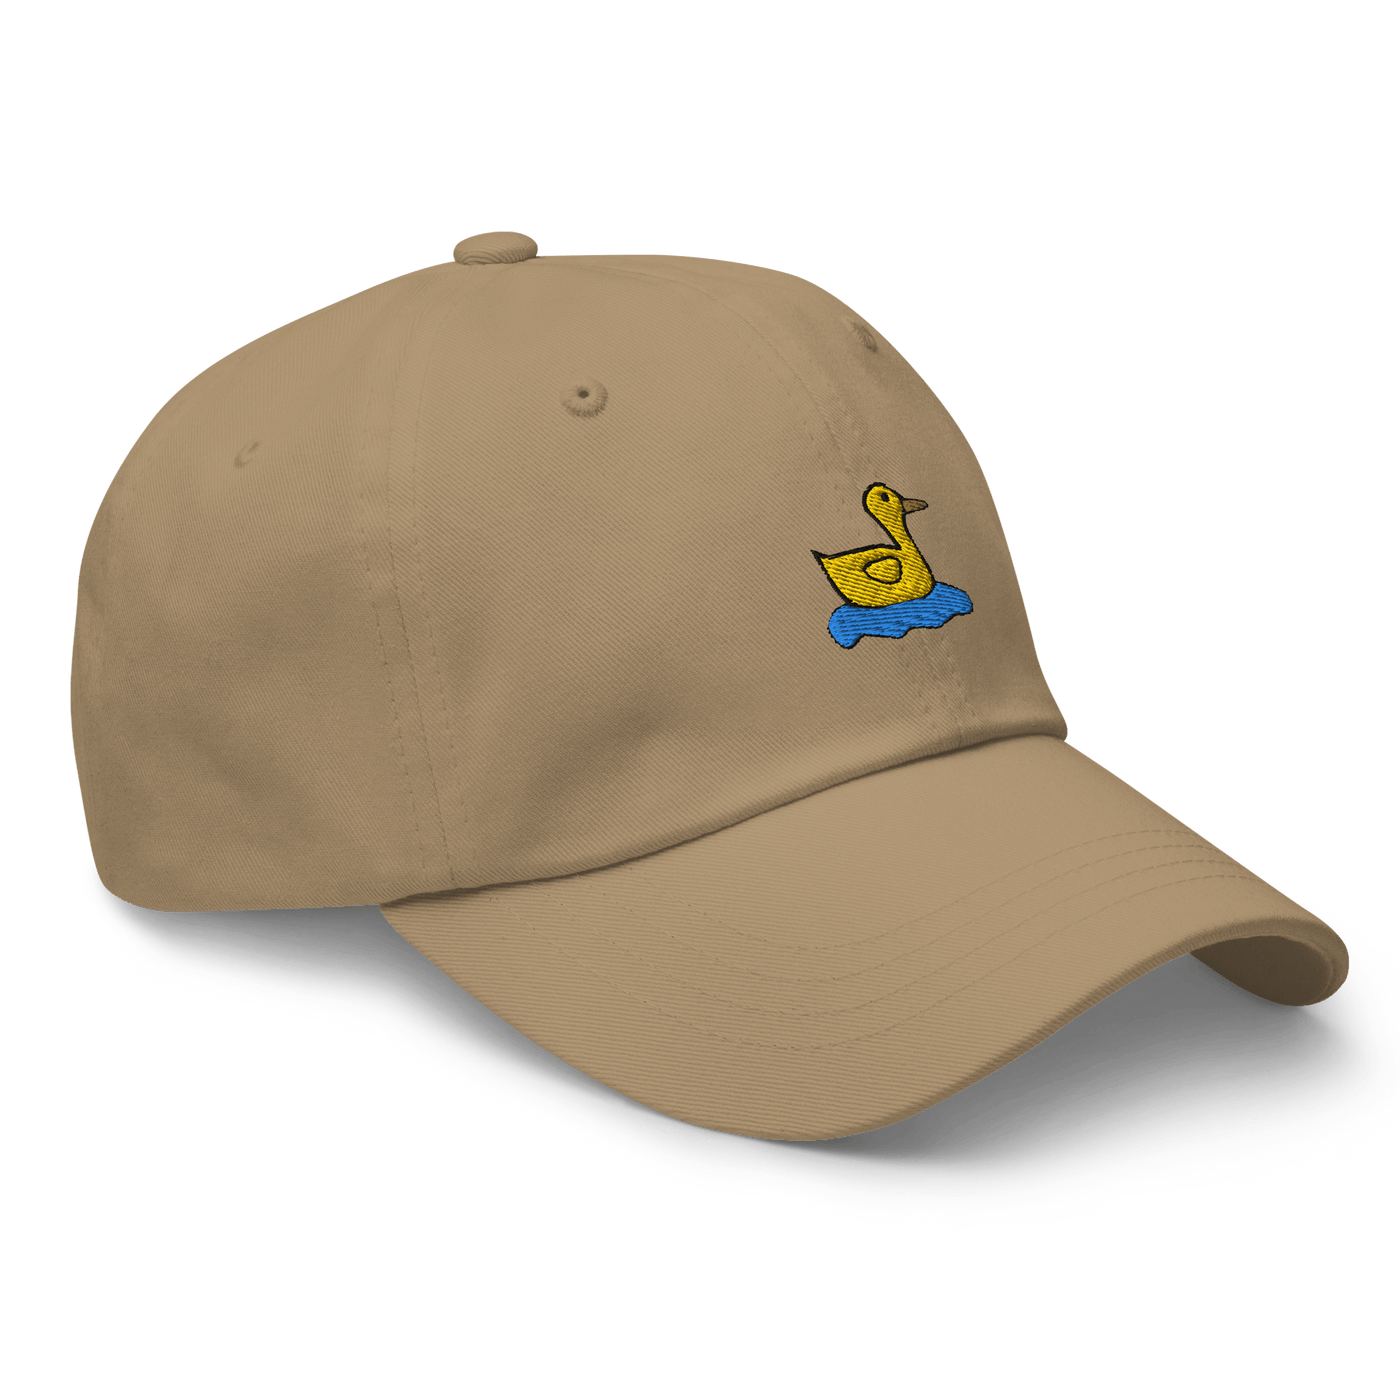 Lonely Duck Dad hat - Khaki - - Just Another Cap Store